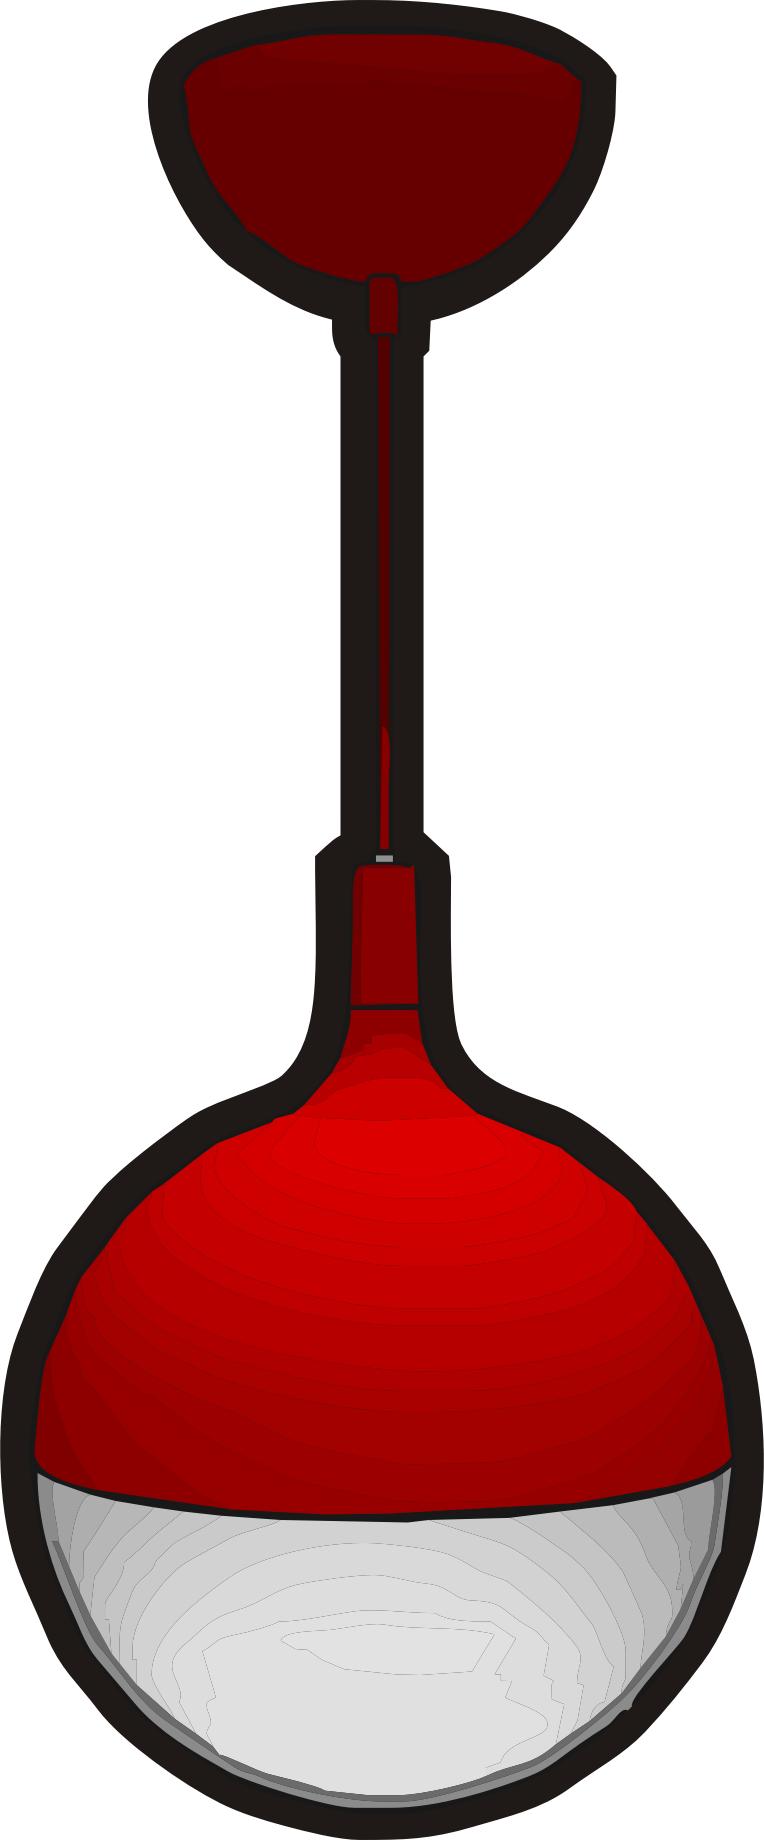 Ikea stuff - Vaster ceiling lamp, red png